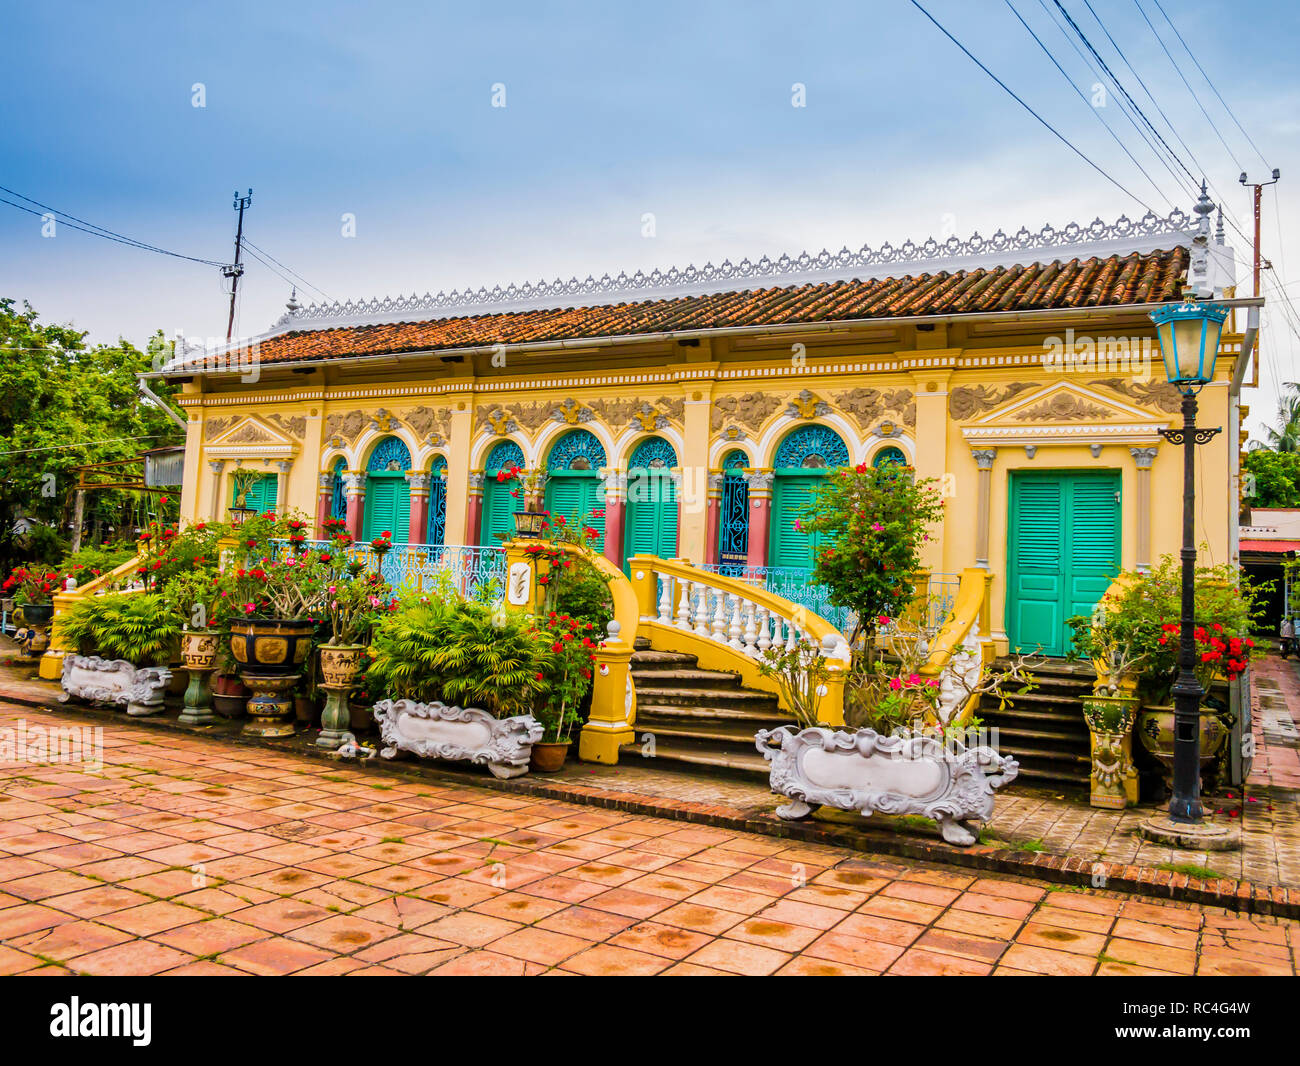 Casa storica in francese in stile coloniale, Binh Thuy village, Can Tho, Vietnam Foto Stock